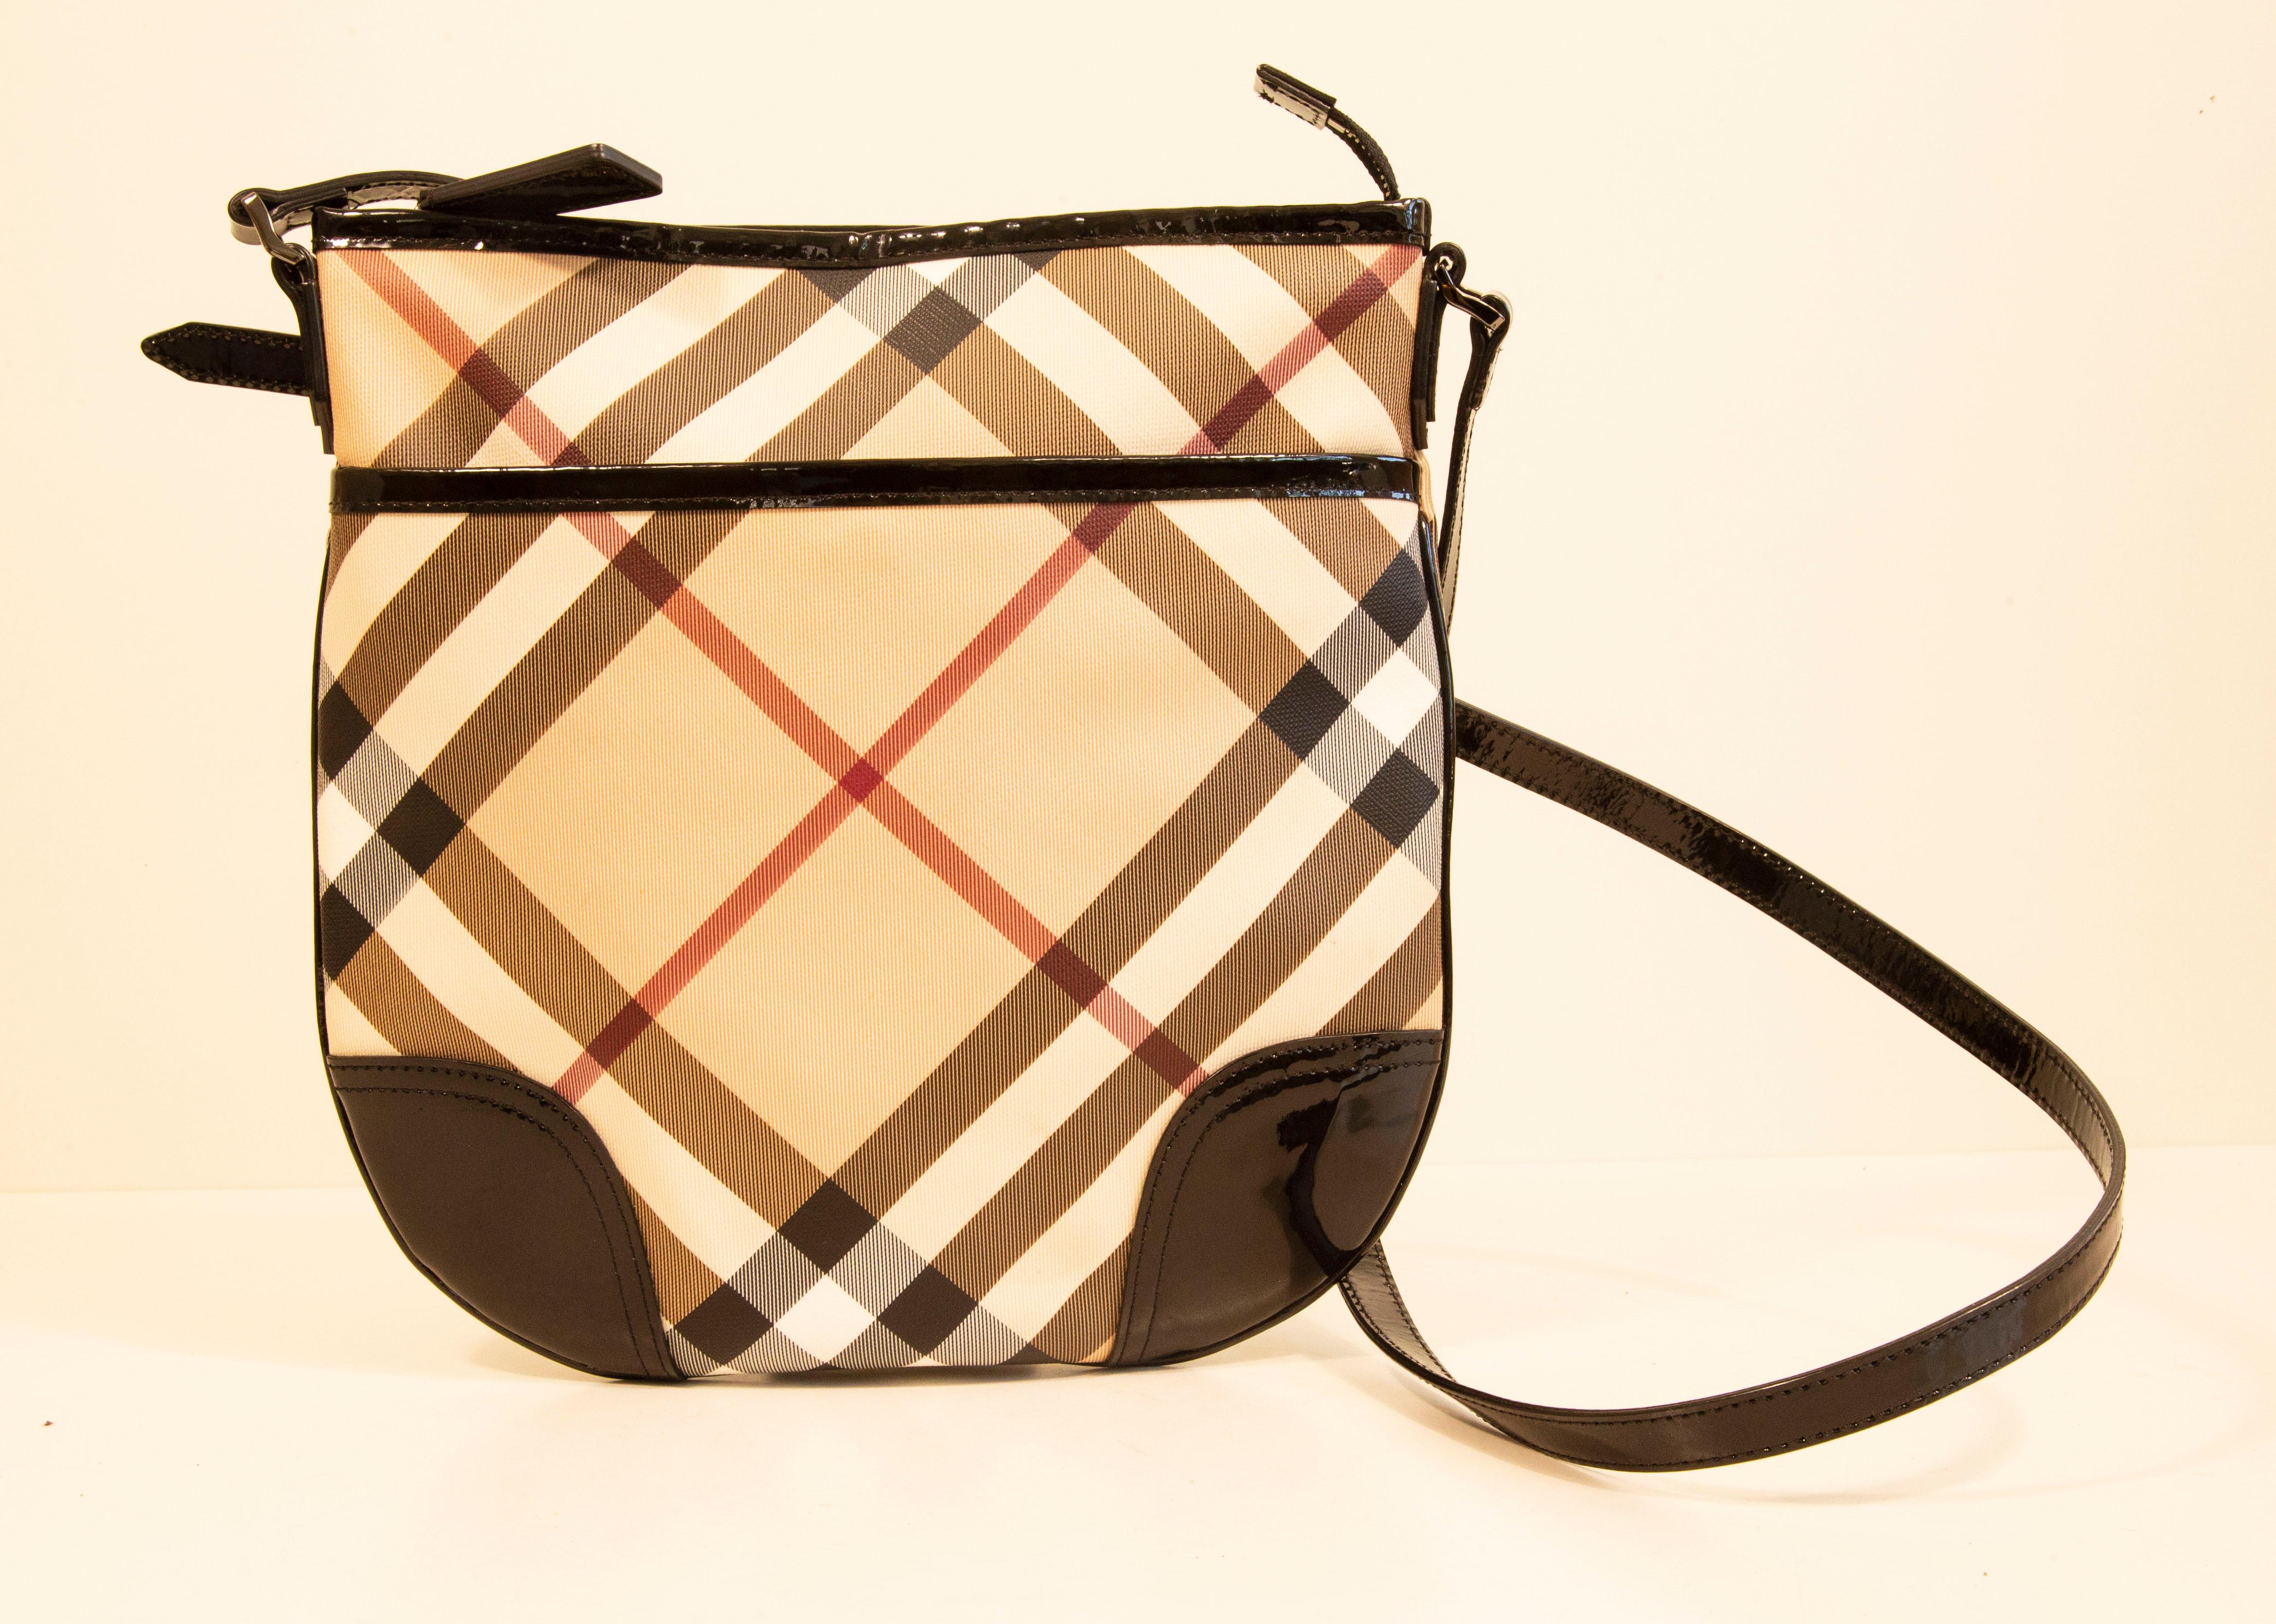 Burberry Dryden Crossbody Bag in Multicolor Coated Canvas 21st C In Excellent Condition For Sale In Arnhem, NL